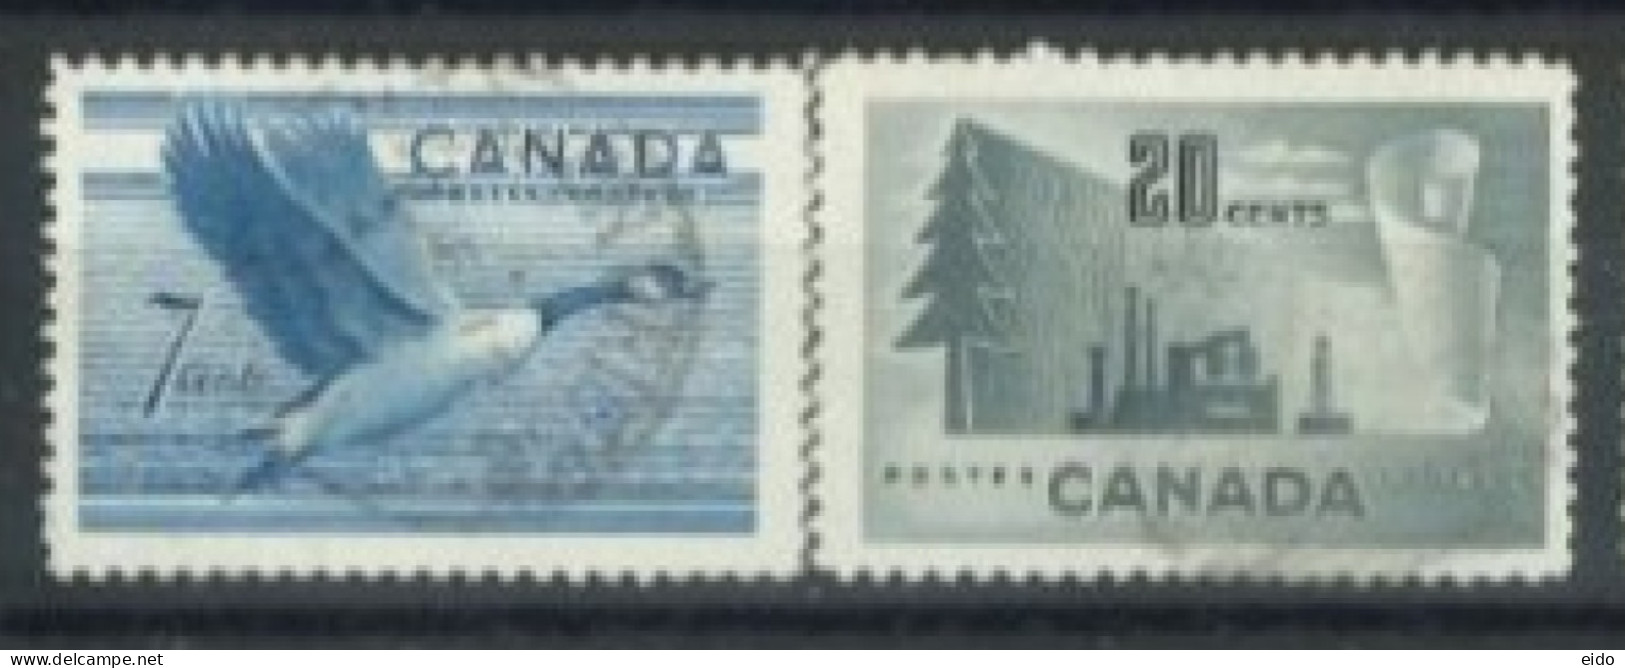 CANADA - 1951/52, CANADIAN GOOSE & FORESTY PRODUCTS STAMPS SET OF 2, USED. - Gebruikt